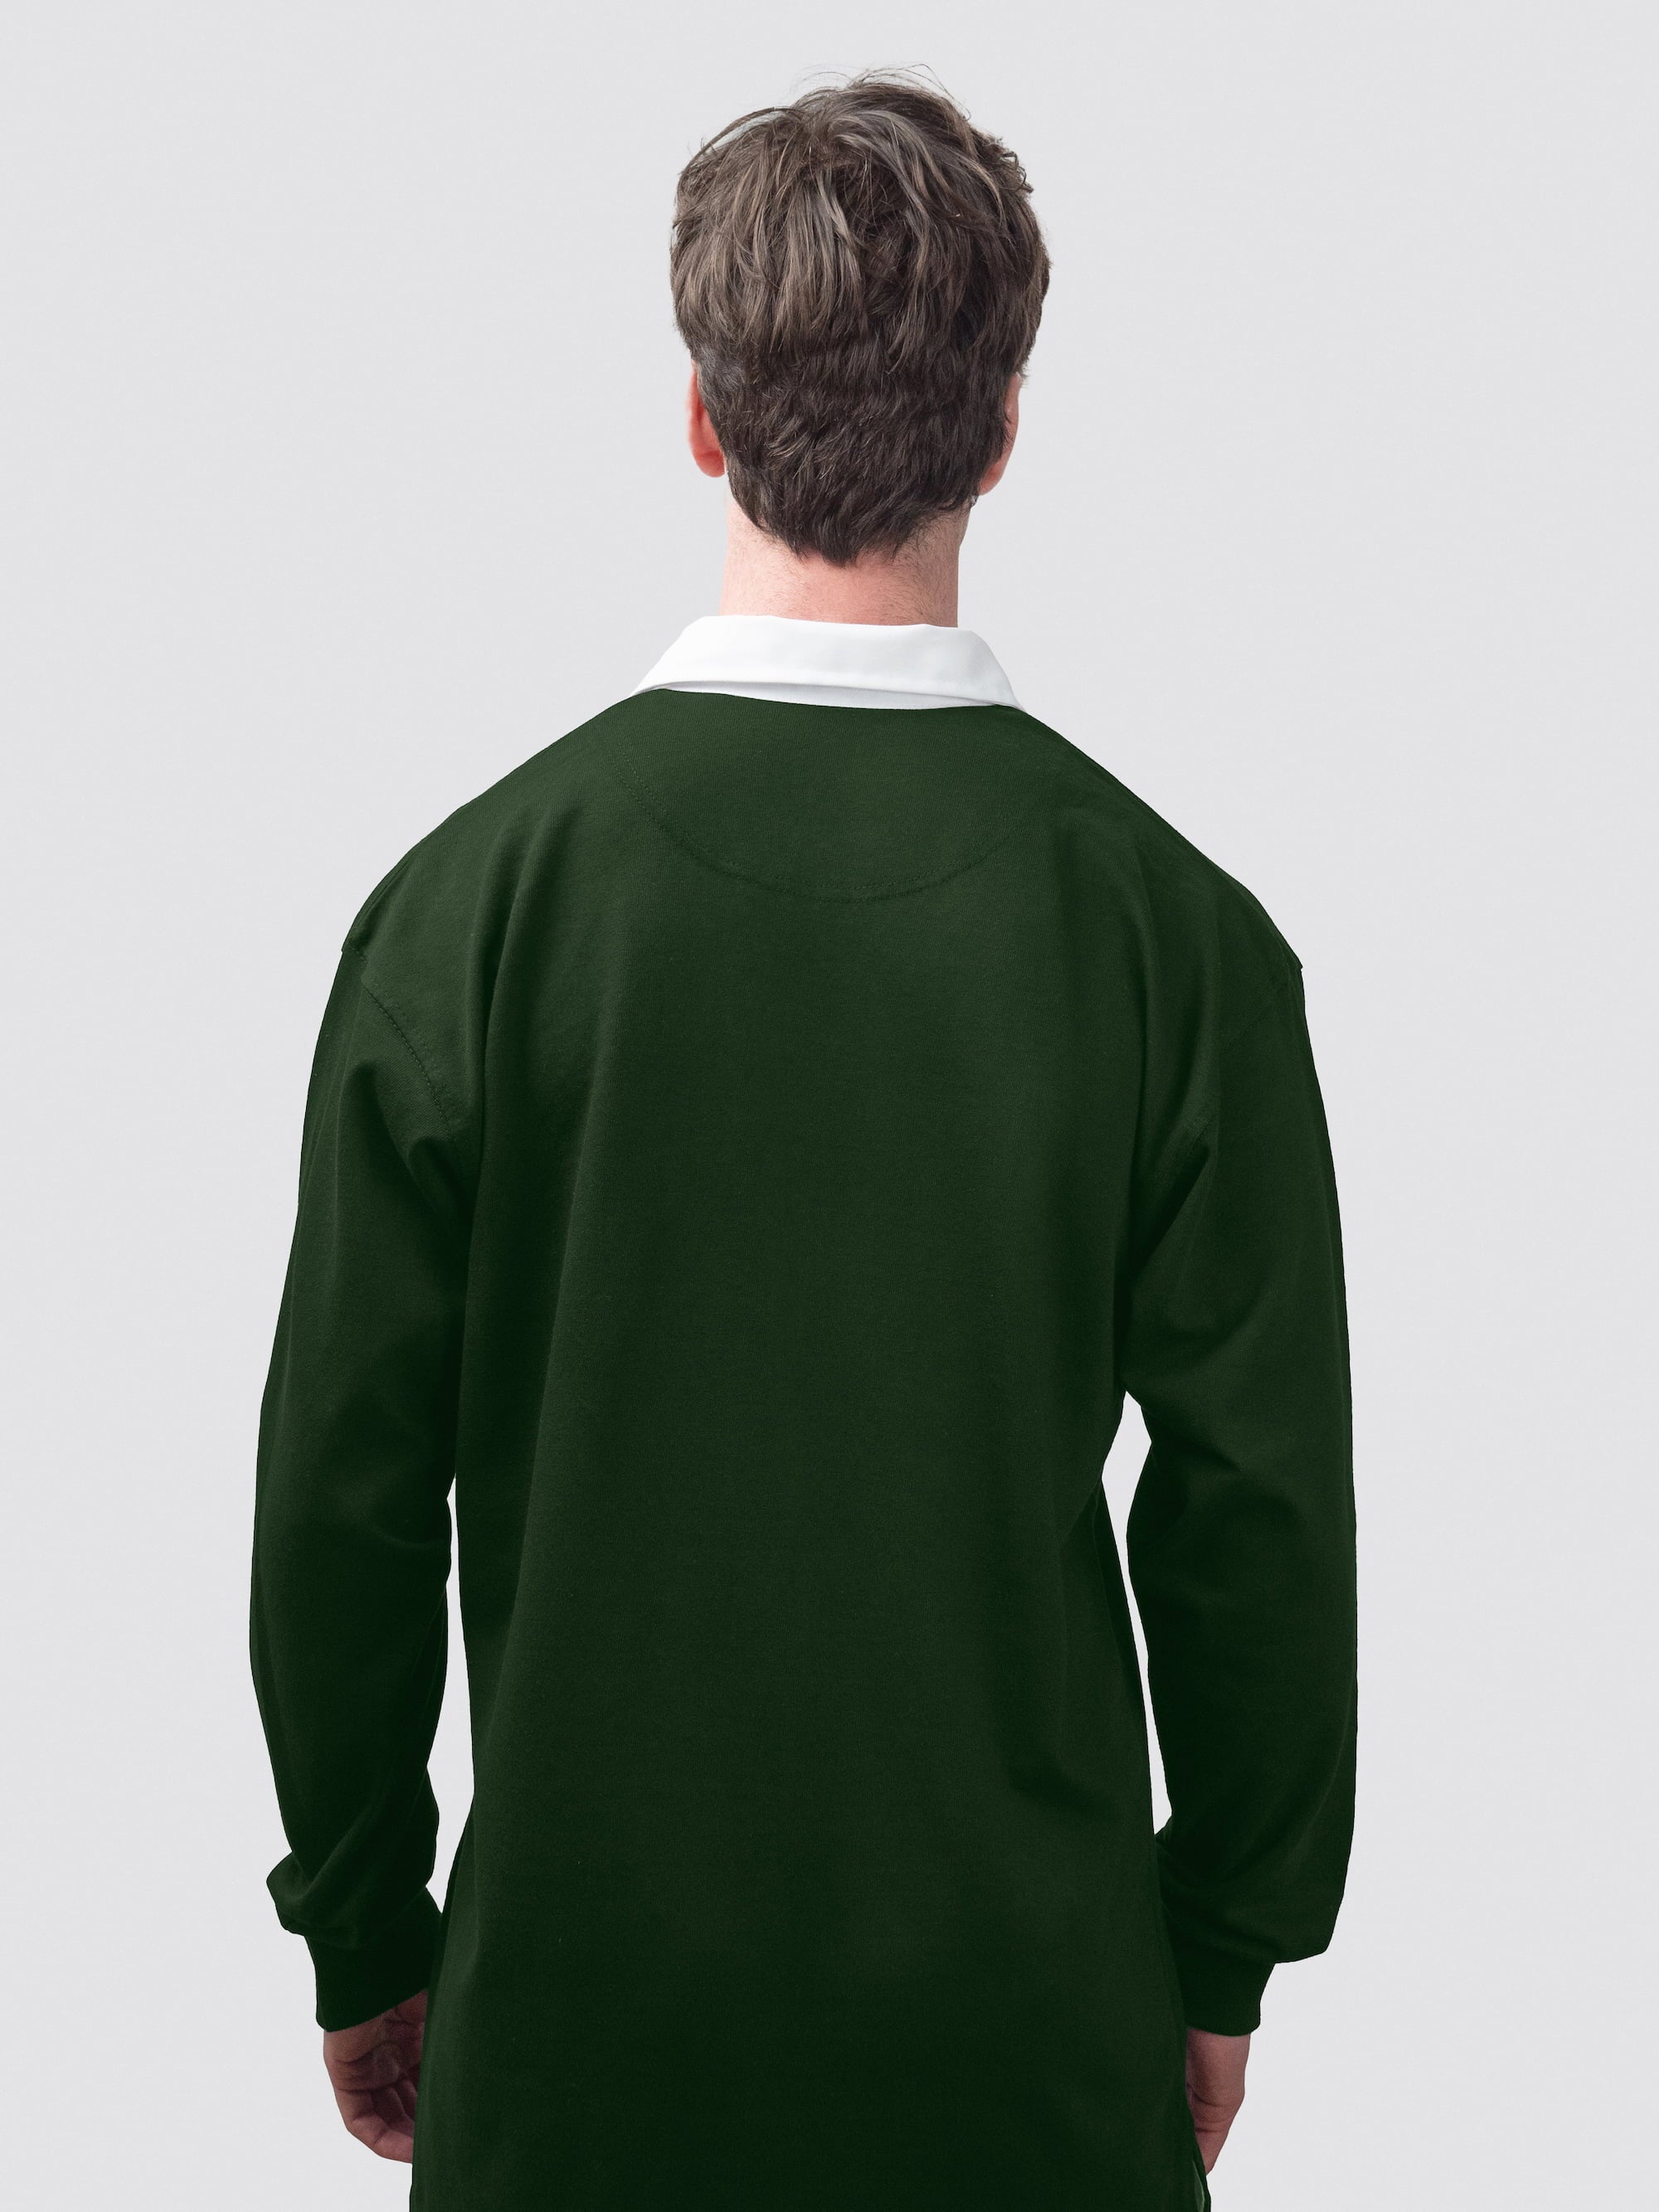 Classic fit, Oxford University rugby shirt in Bottle Green